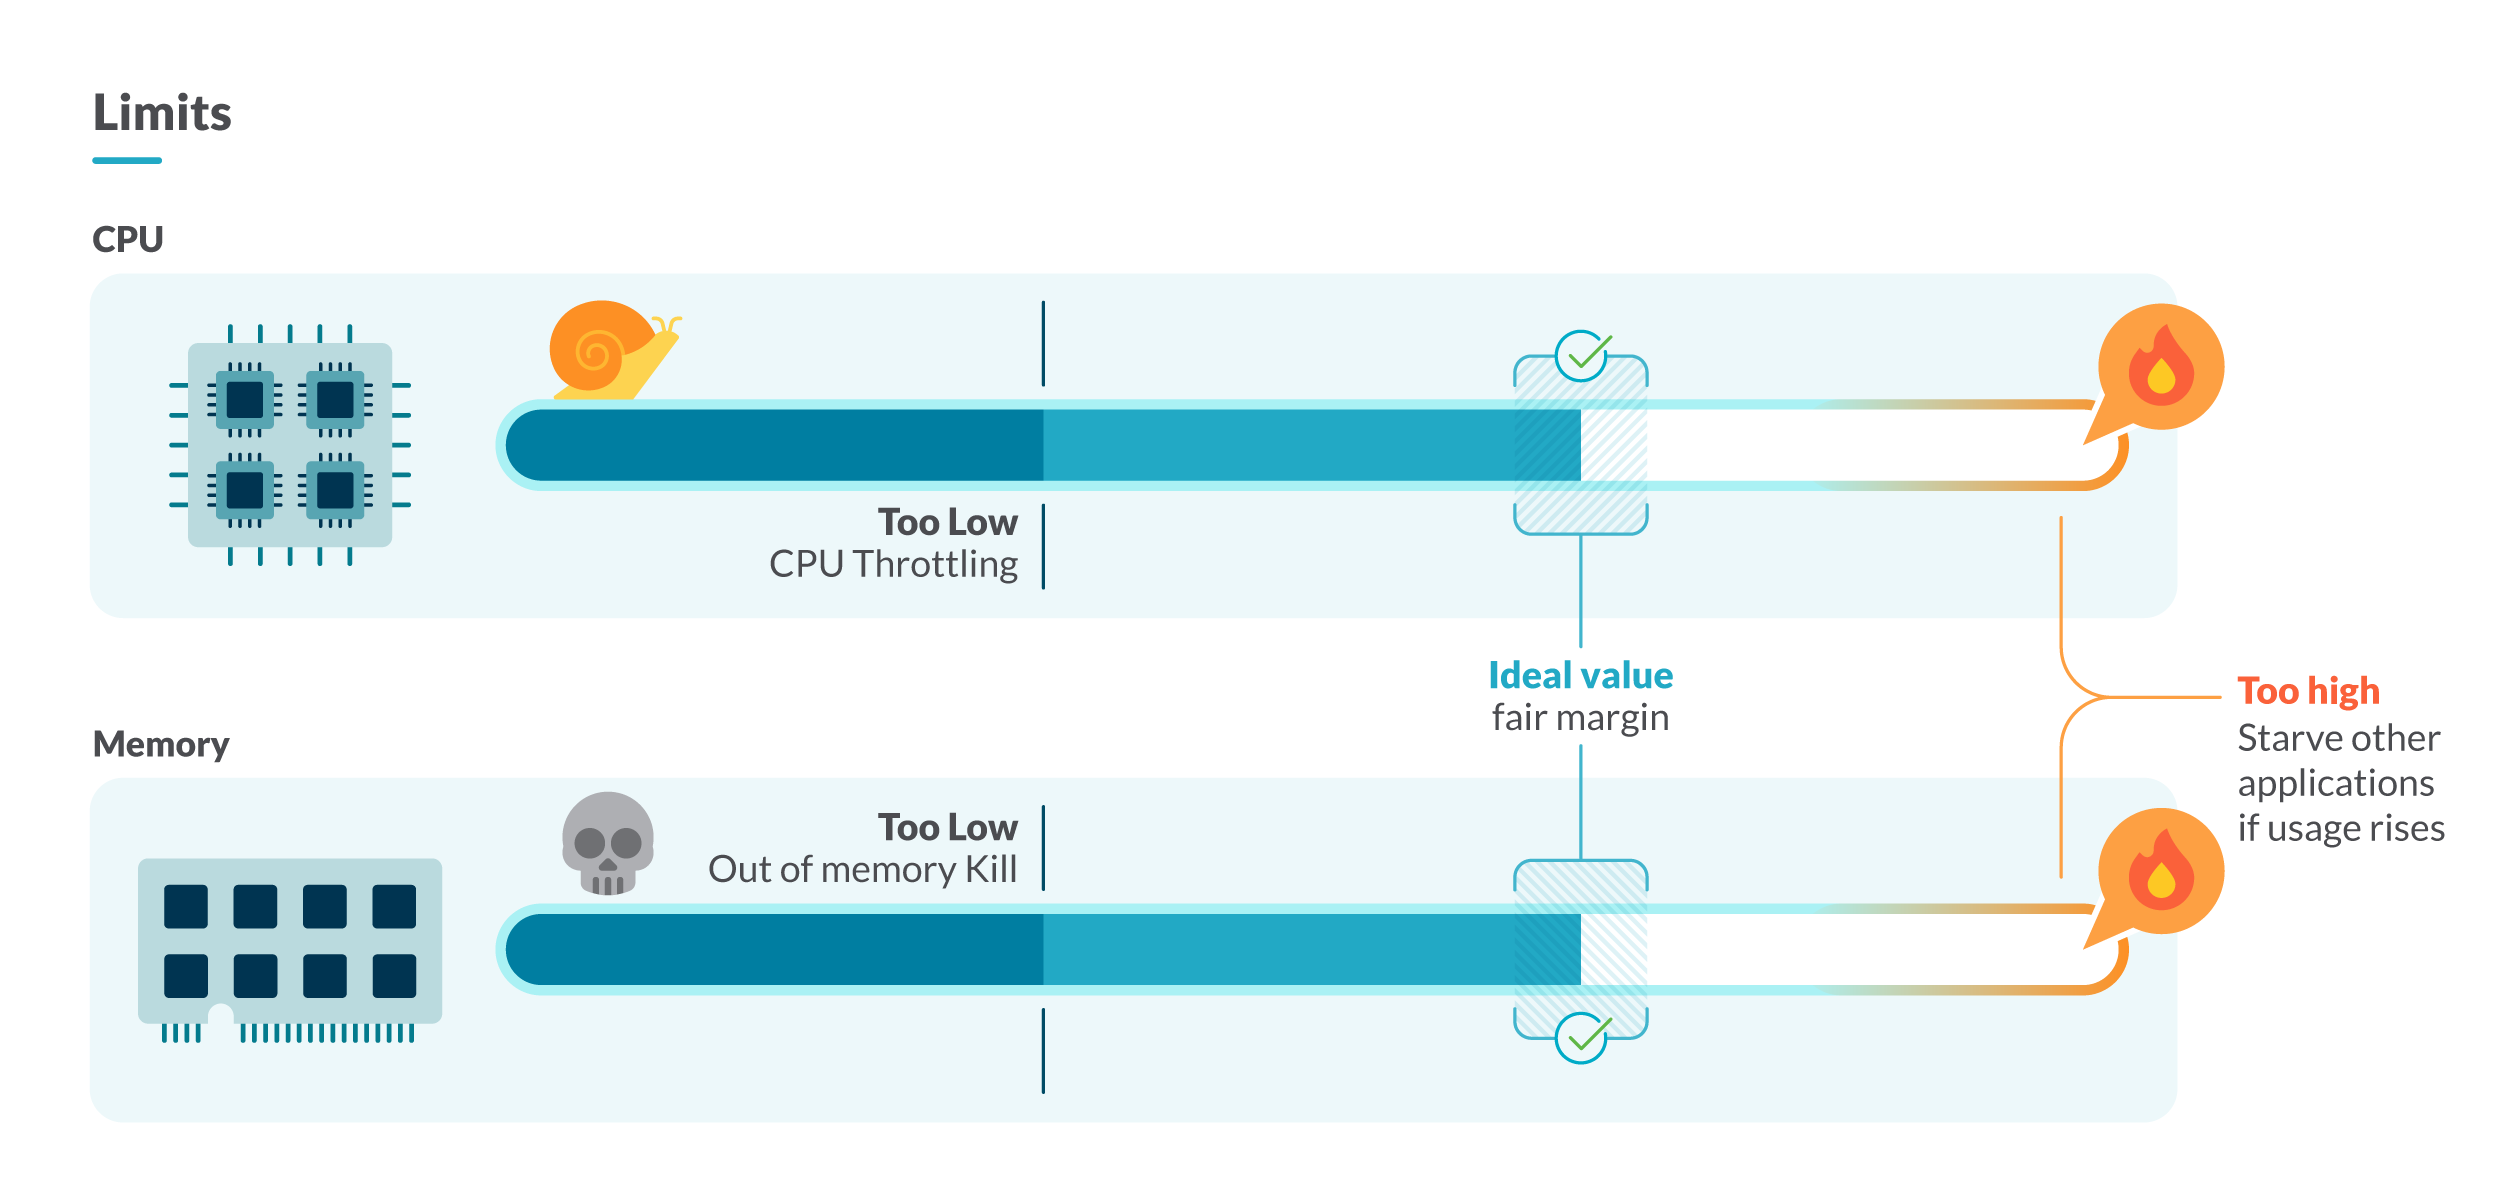 this illustration shows how setting the Kubernetes resource limits too tight can cause CPU Throttling or out-of-memory situations, and setting them too loose can kill the node due to resource starvation